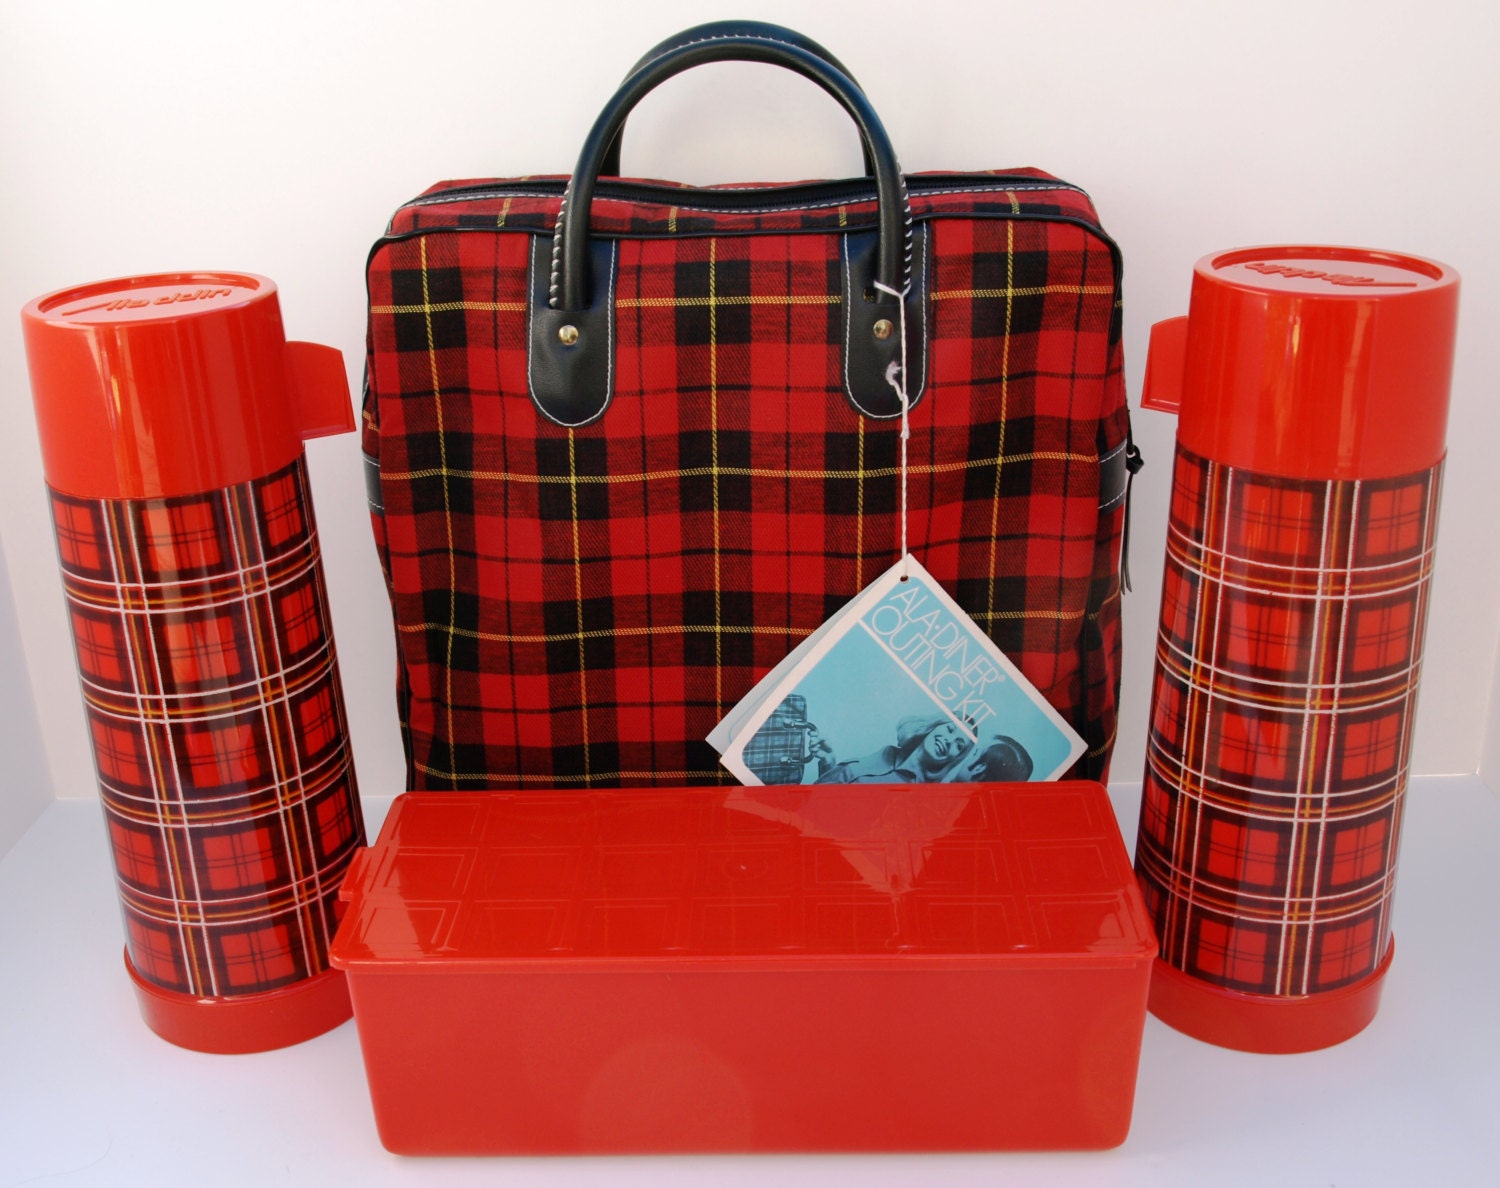 Vintage Red Plaid Aladdin Thermos Ala-Diner Picnic Kit, Brand New with Tags - FiveStarFinds